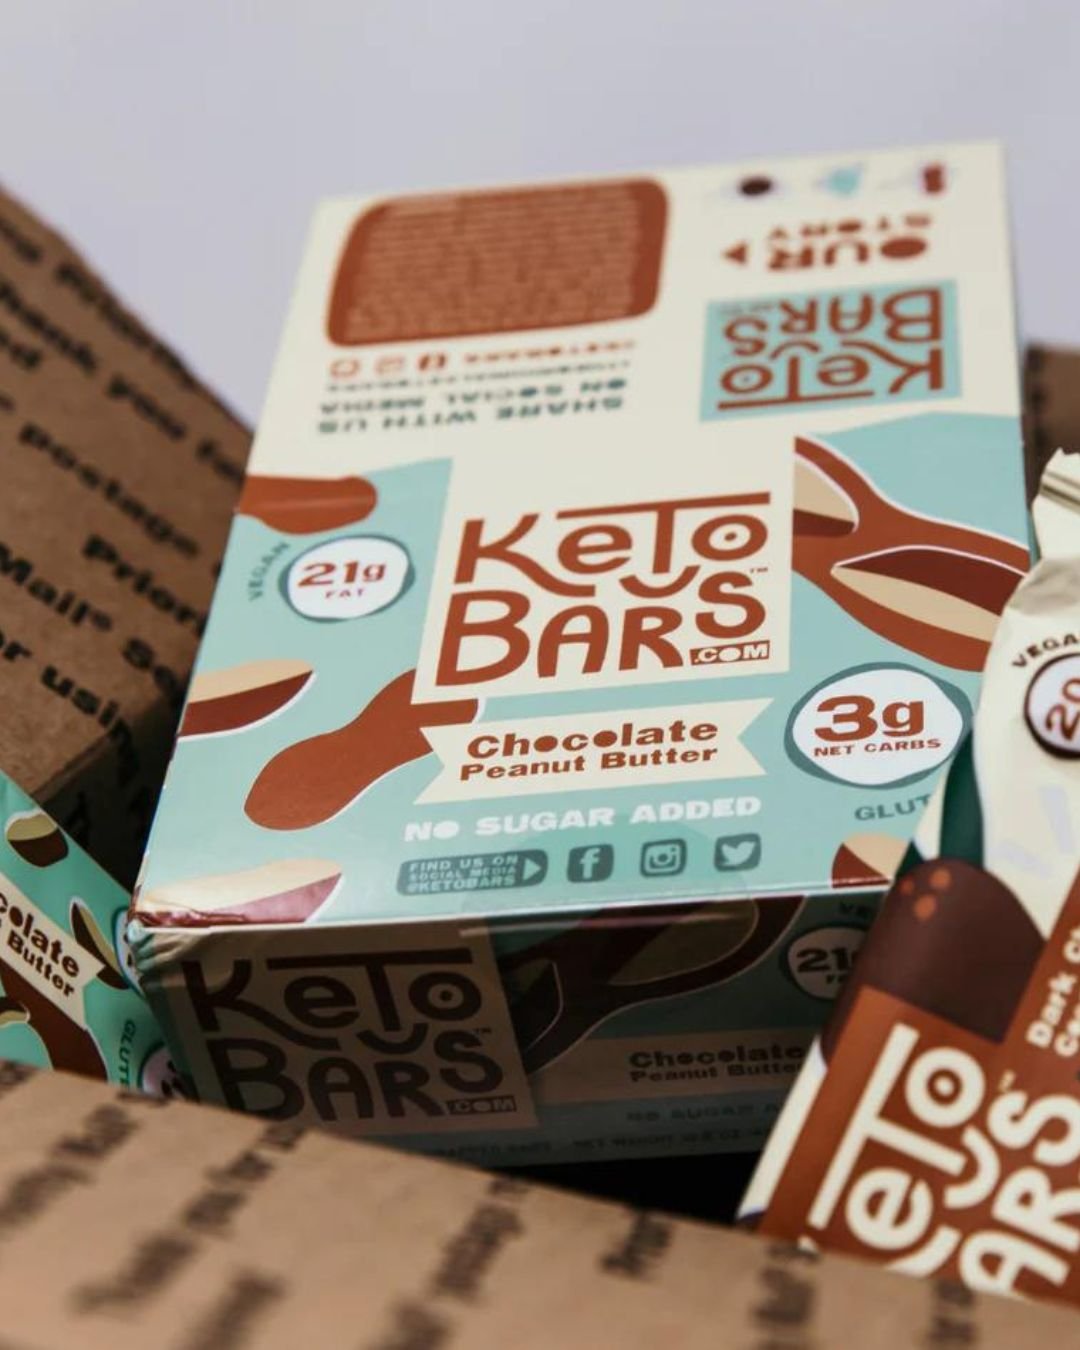 The Perfect Keto Vegan Keto Bars are one of their newest products and are made with simple, clean ingredients like almonds, cacao, and coconut oil. Plus, they're gluten-free, soy-free, and dairy-free!